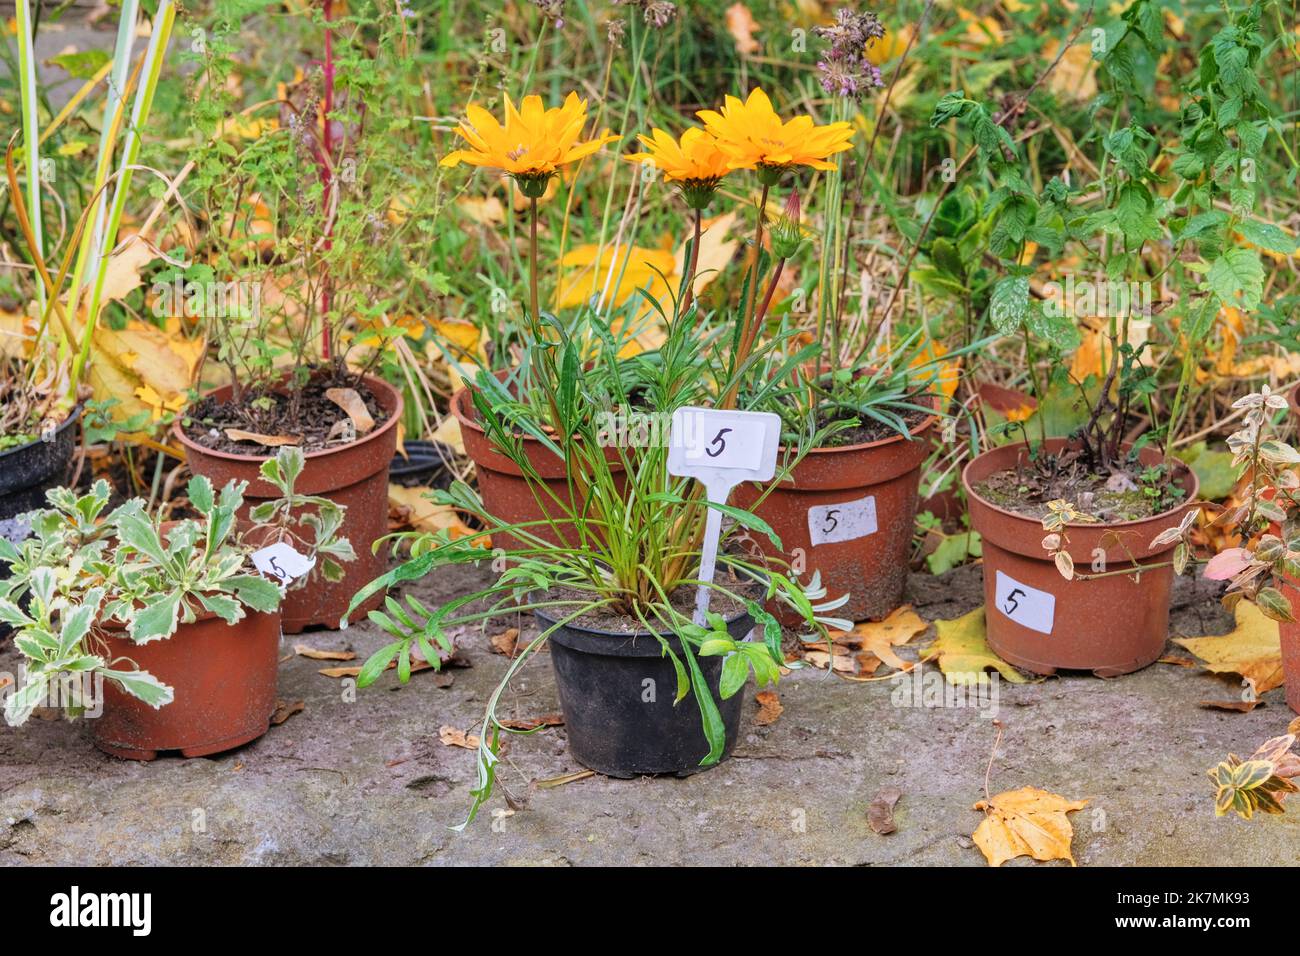 Garden store with flowers. Decorative potted plants are for sale. Bushes and plants in pots in local market. Stock Photo